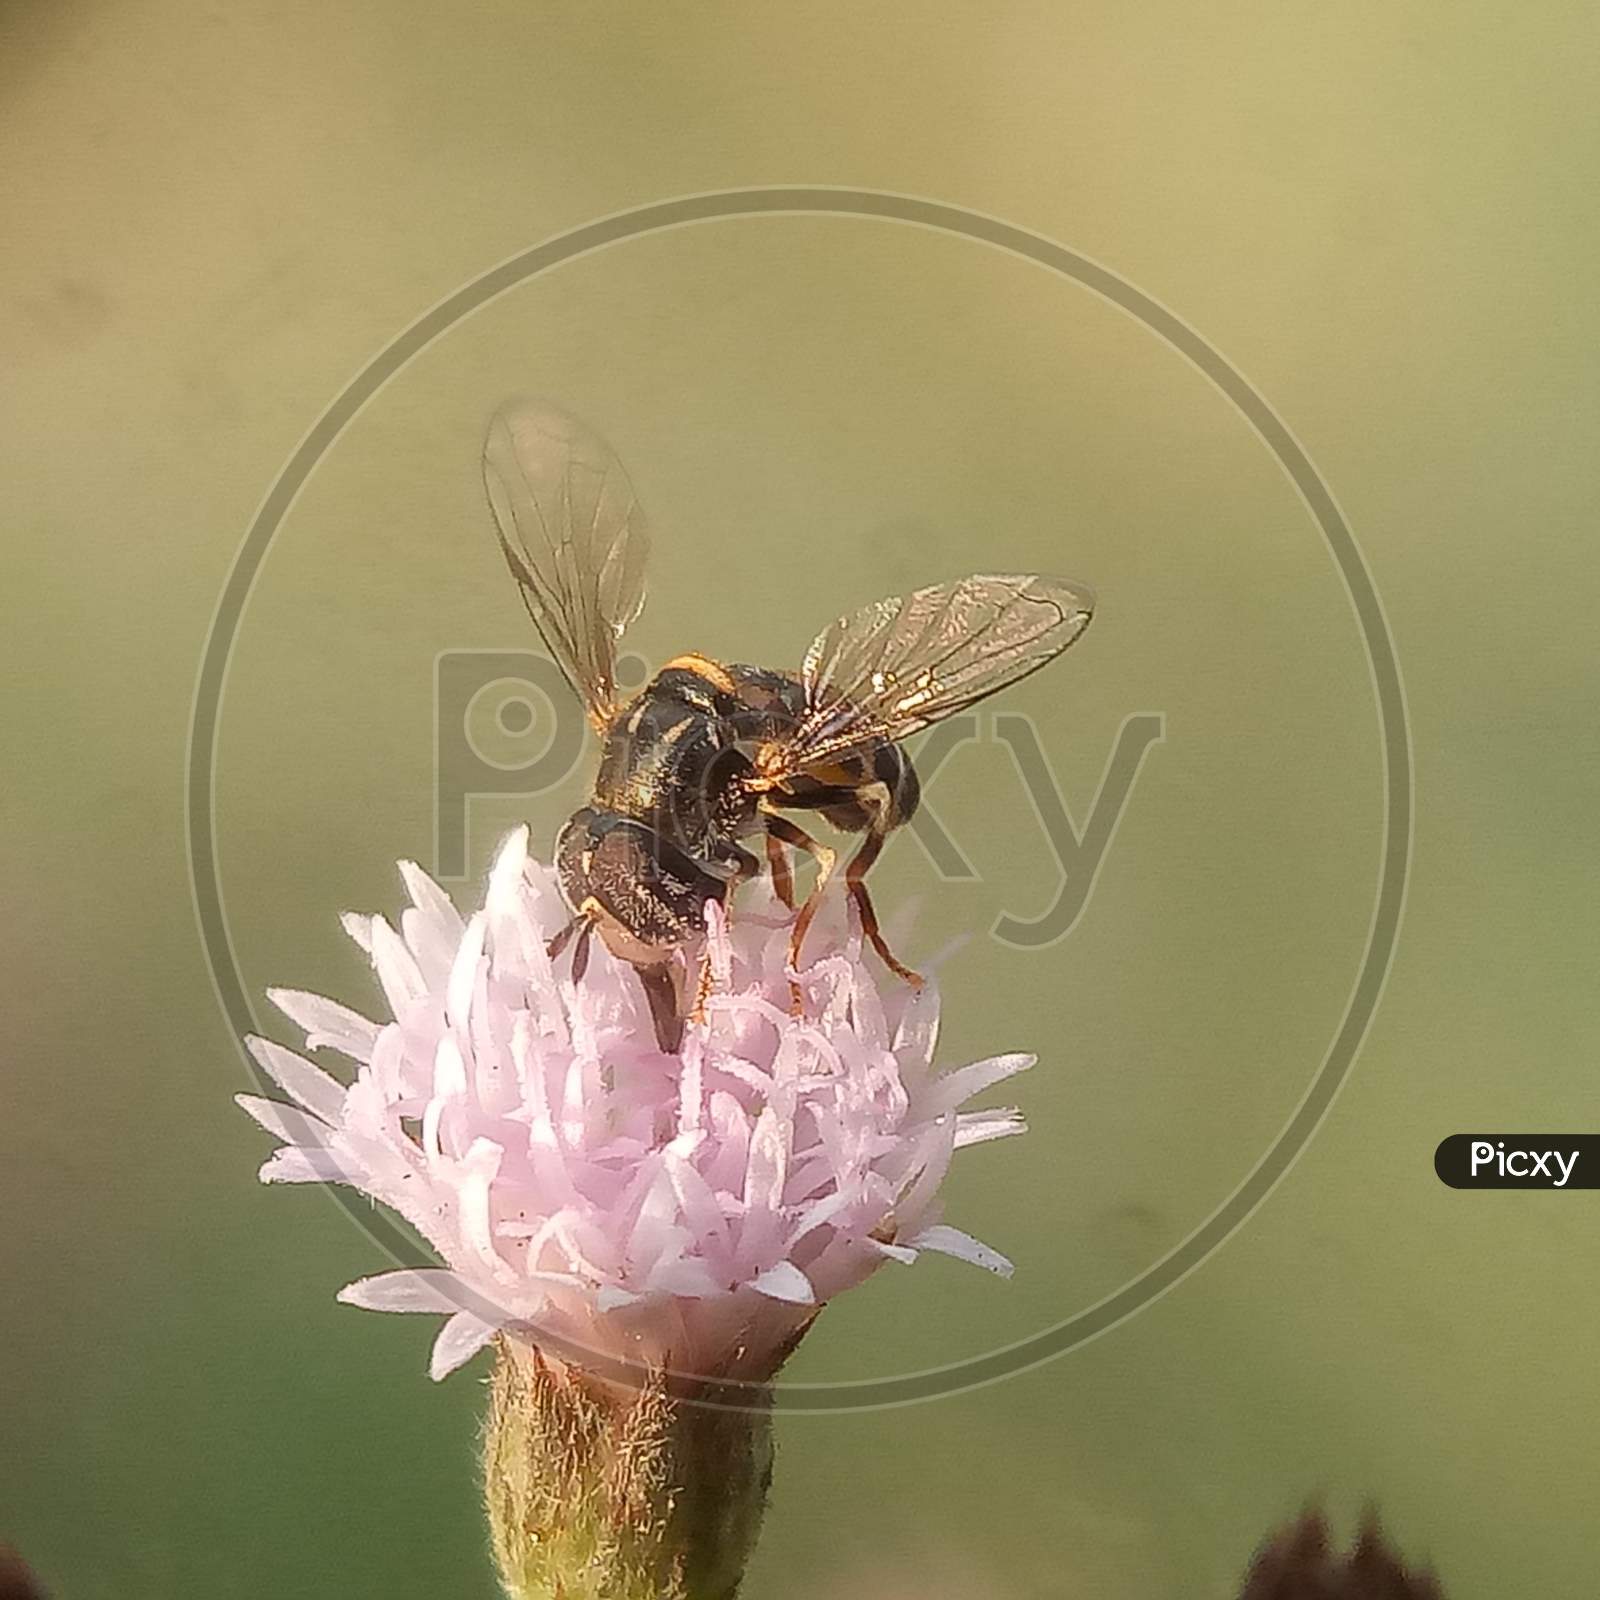 Honey Bee collect Honey from flower. beauty of nature. Mobile macro photography close up photography